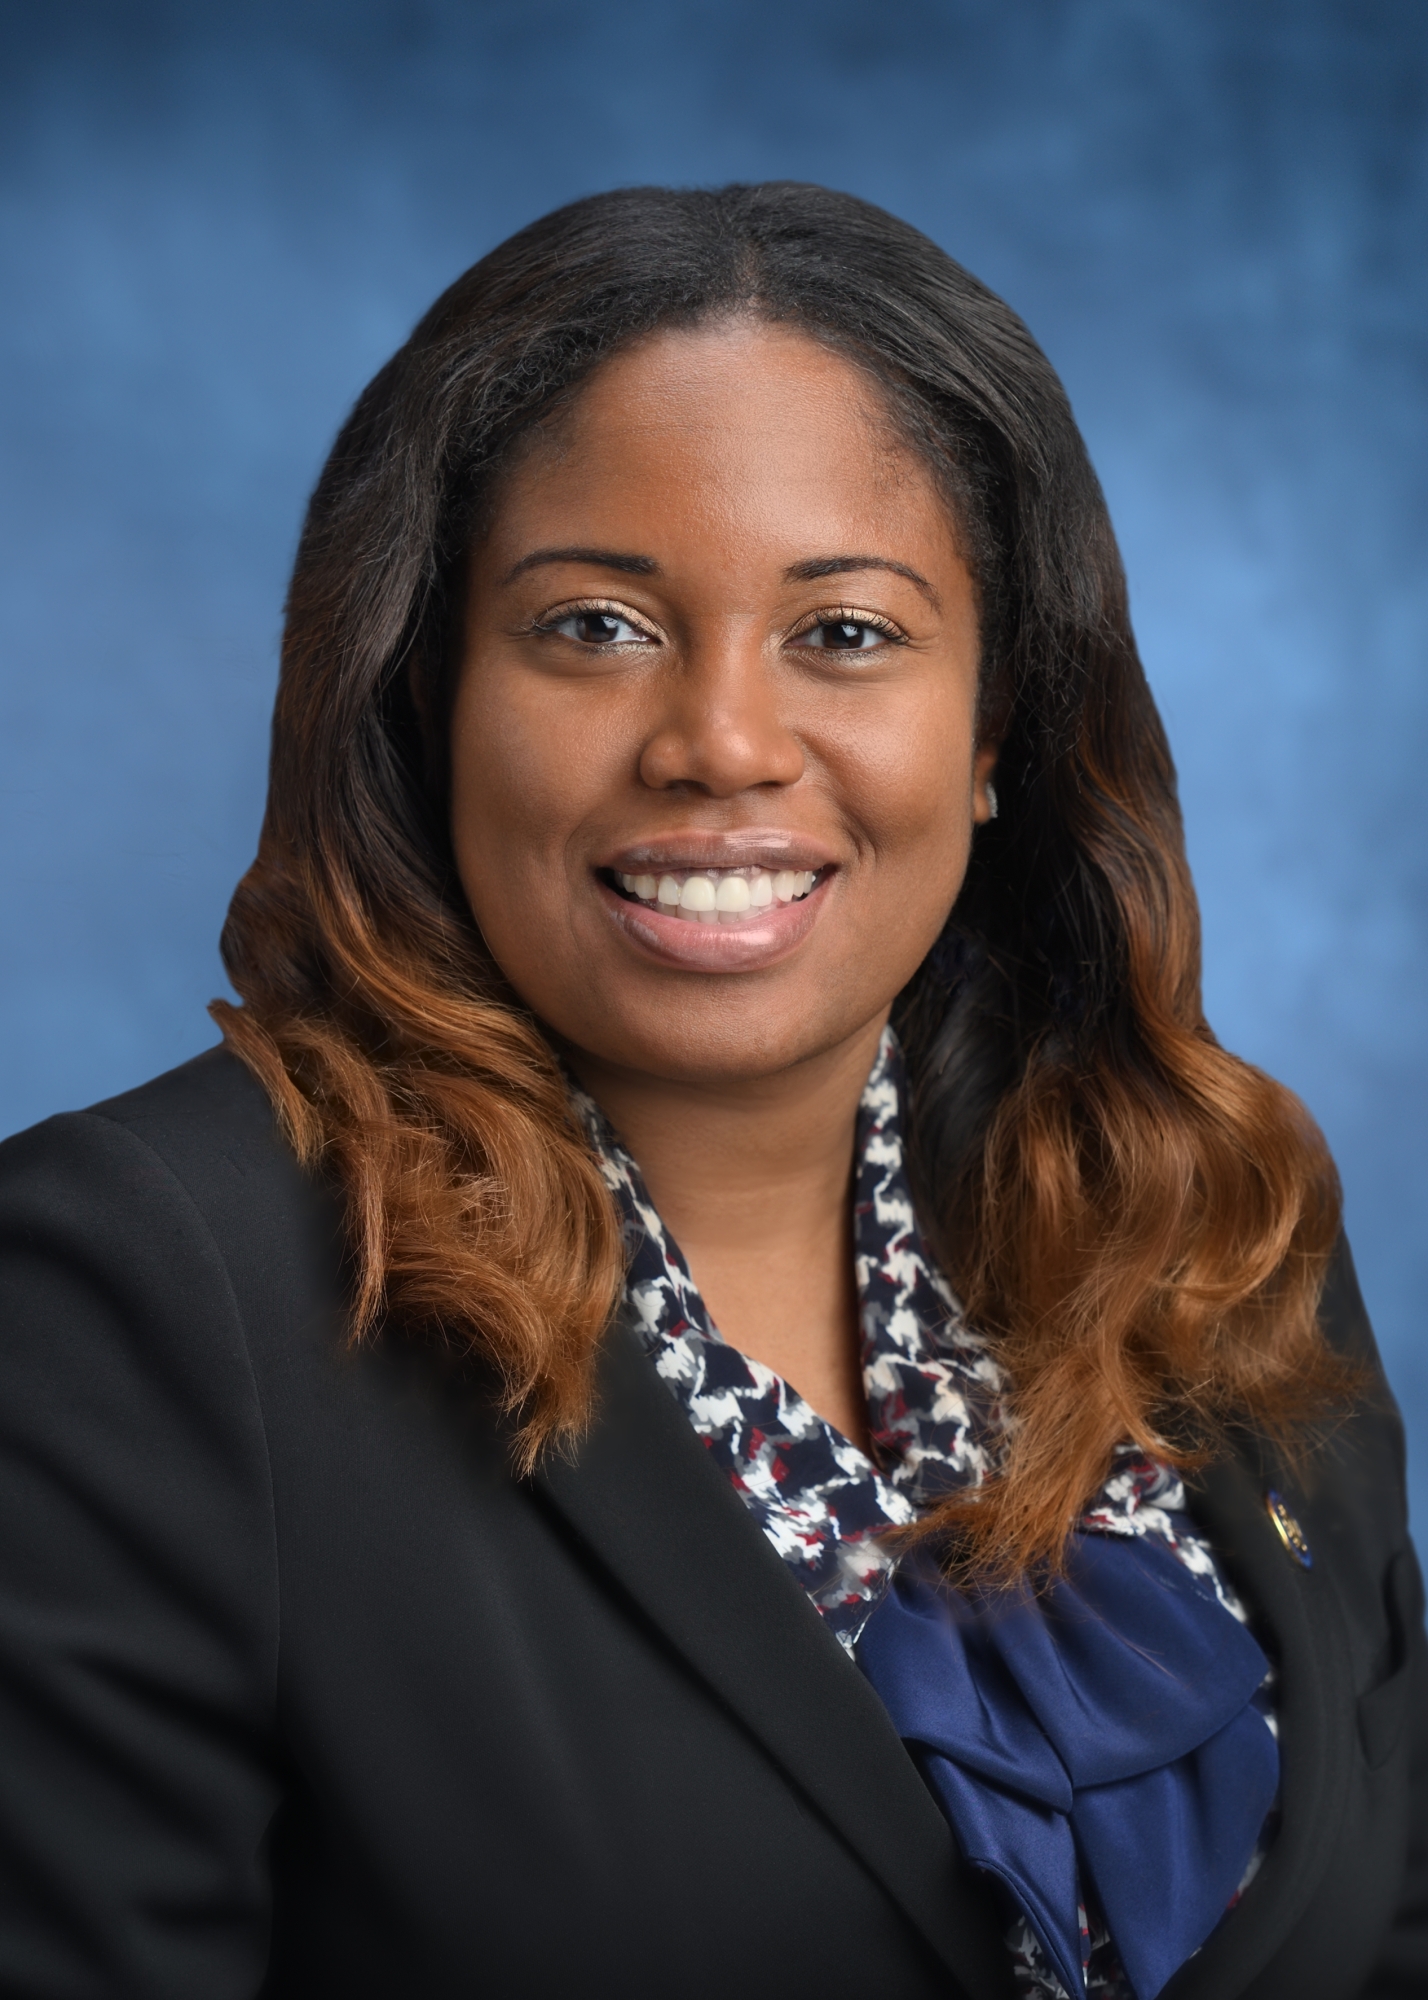 Standing Committee on  Veterans' Affairs Chair  Kimberly Jean-Pierre